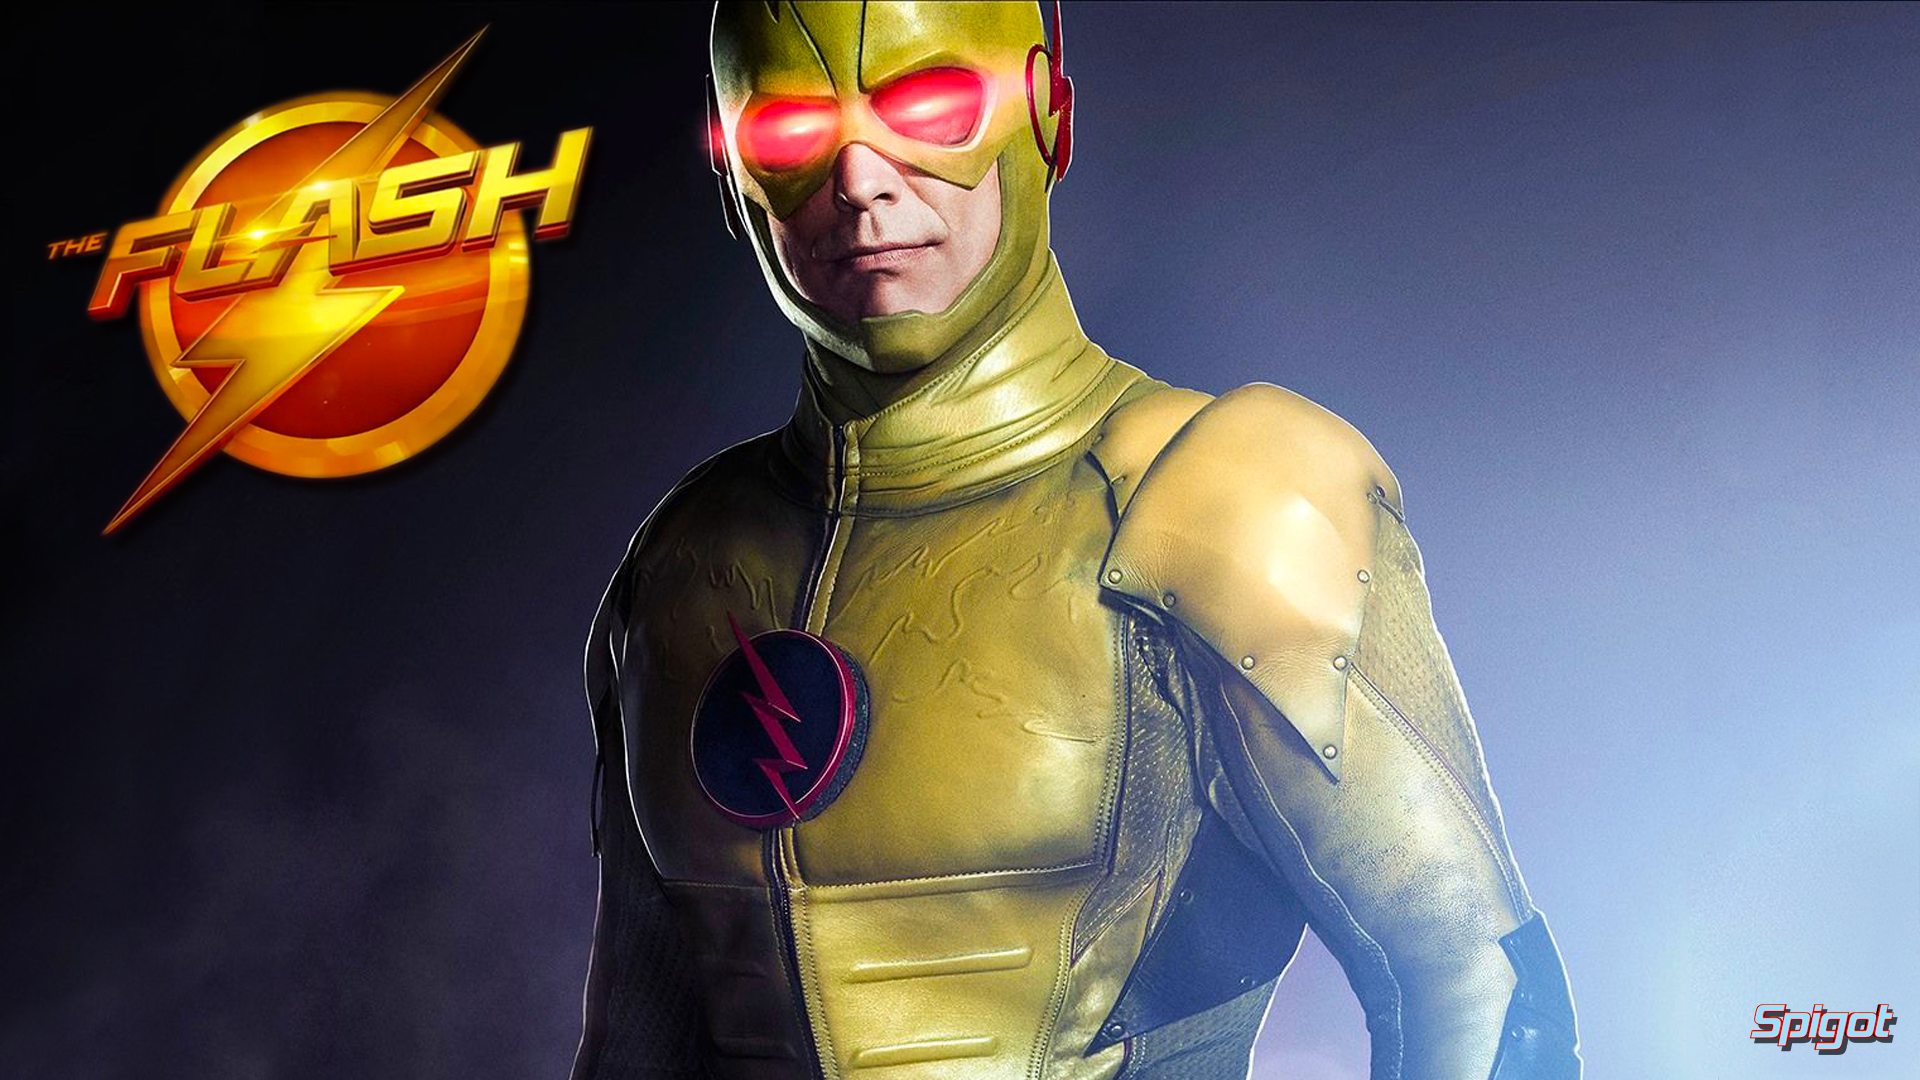 ...and I had to do them of the fantastic CW show The Flash. 